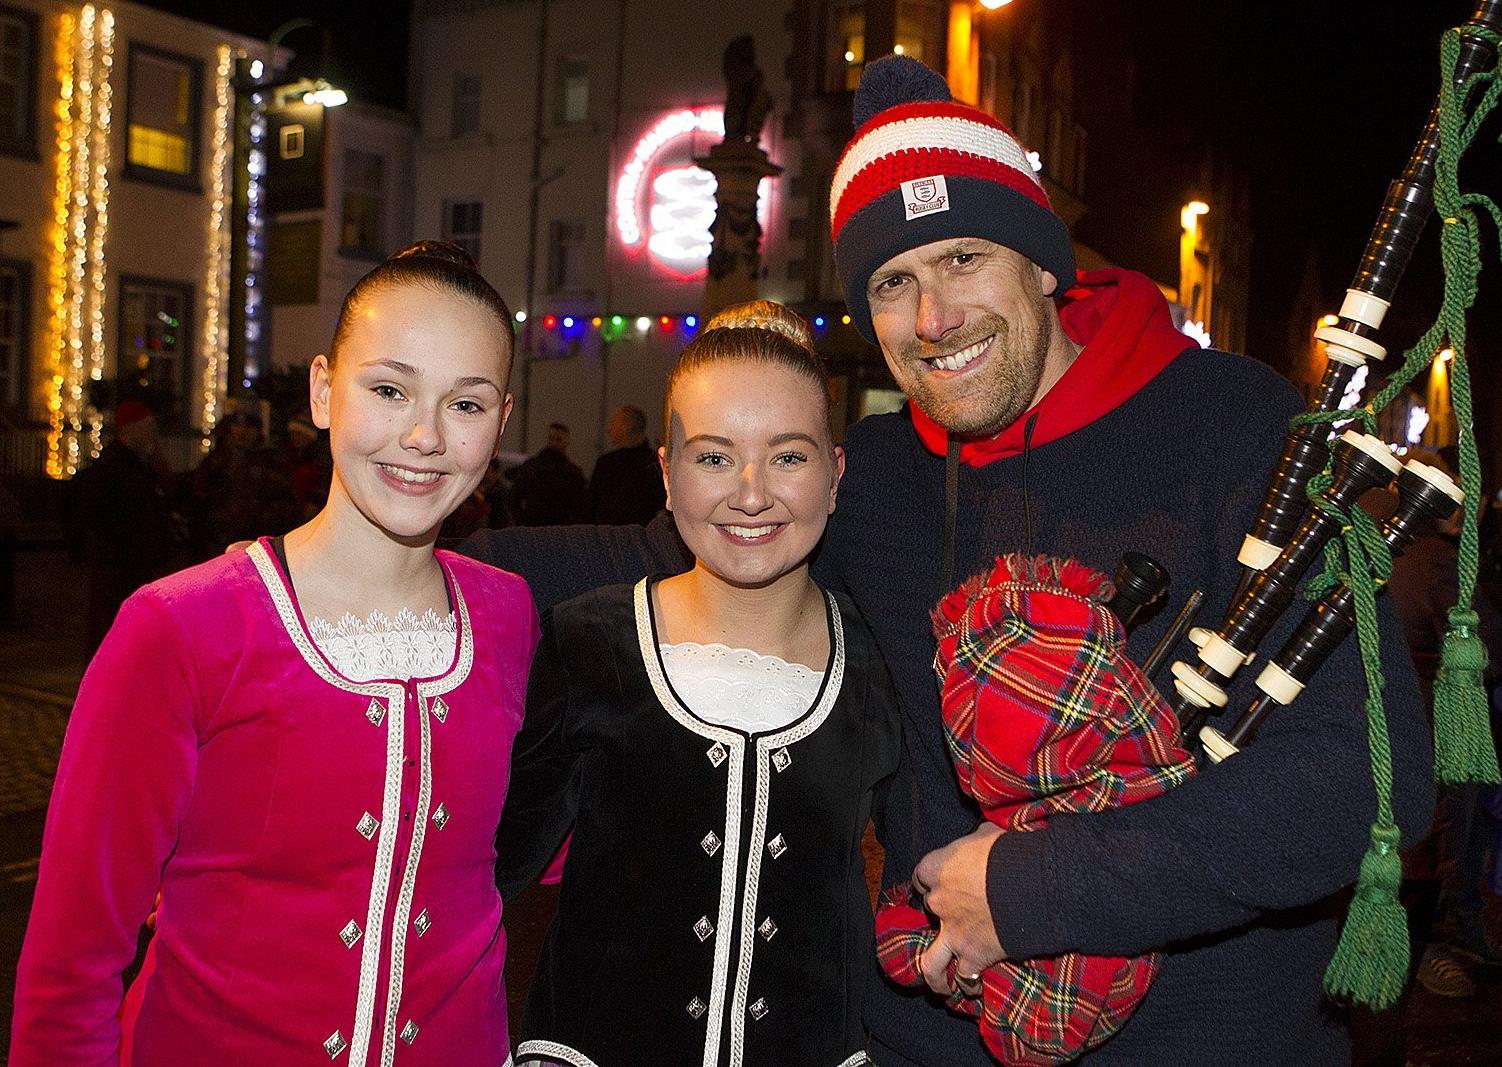 Piper Mark Thomson from Peebles RFC with Highland Dancers, Imogen Smith and Hannah Panlin